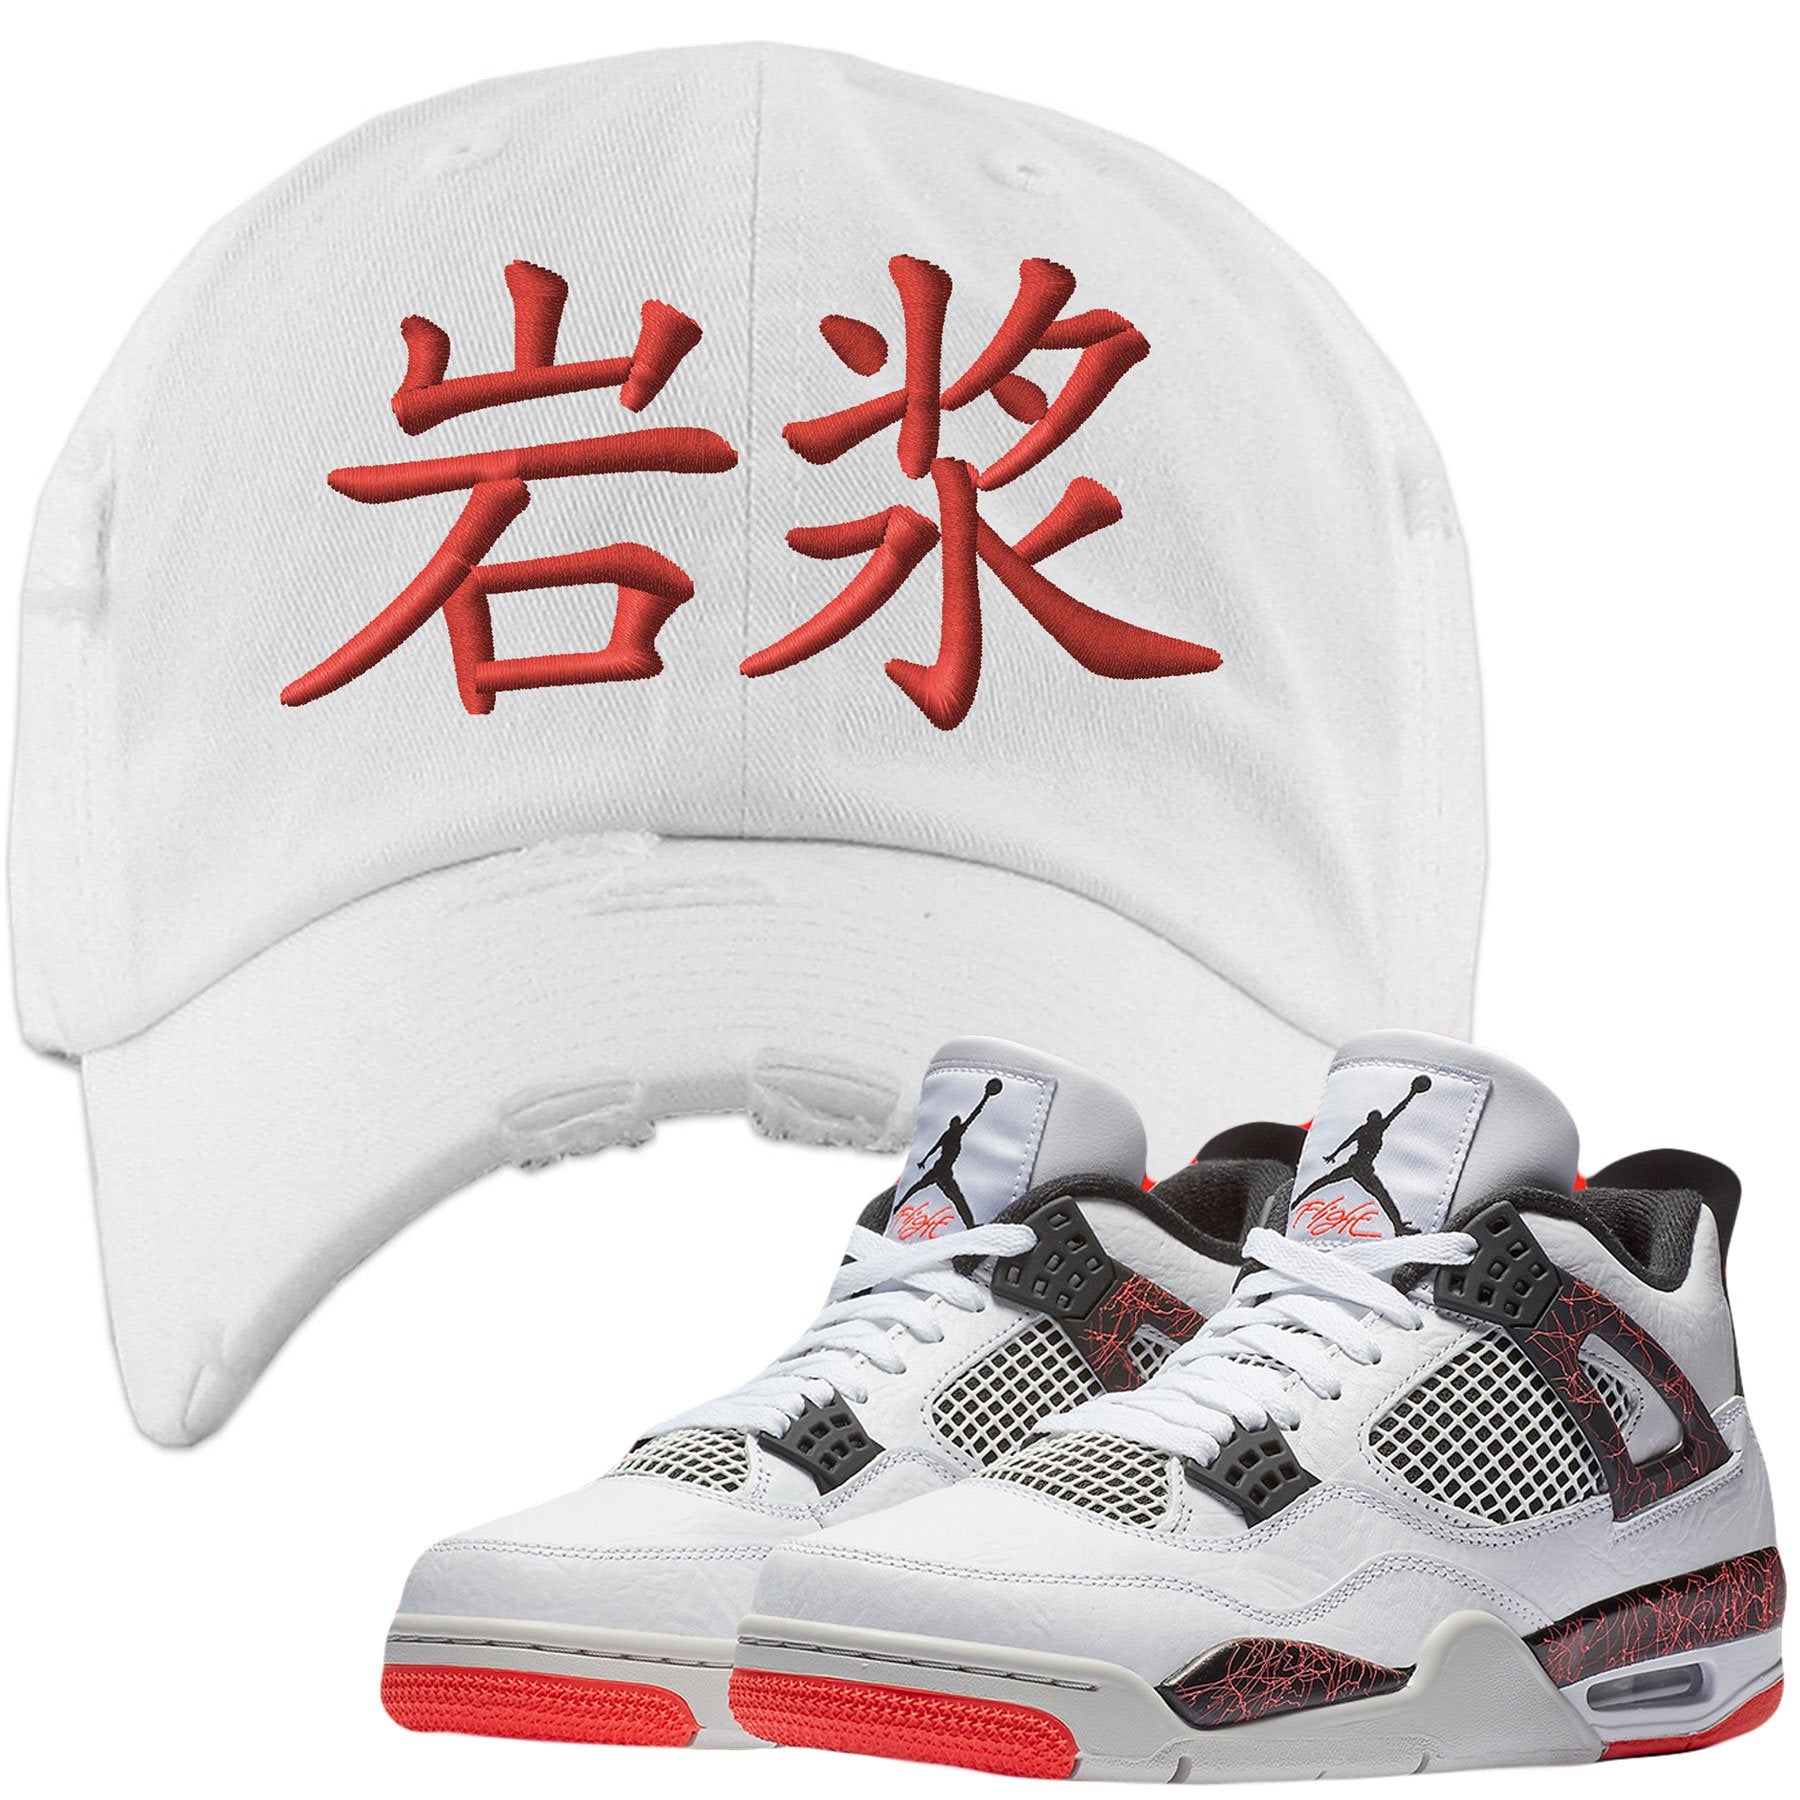 Match your pair of Jordan 4 Pale Citron "Hot Lava 4s" sneakers with this sneaker matching dad hat